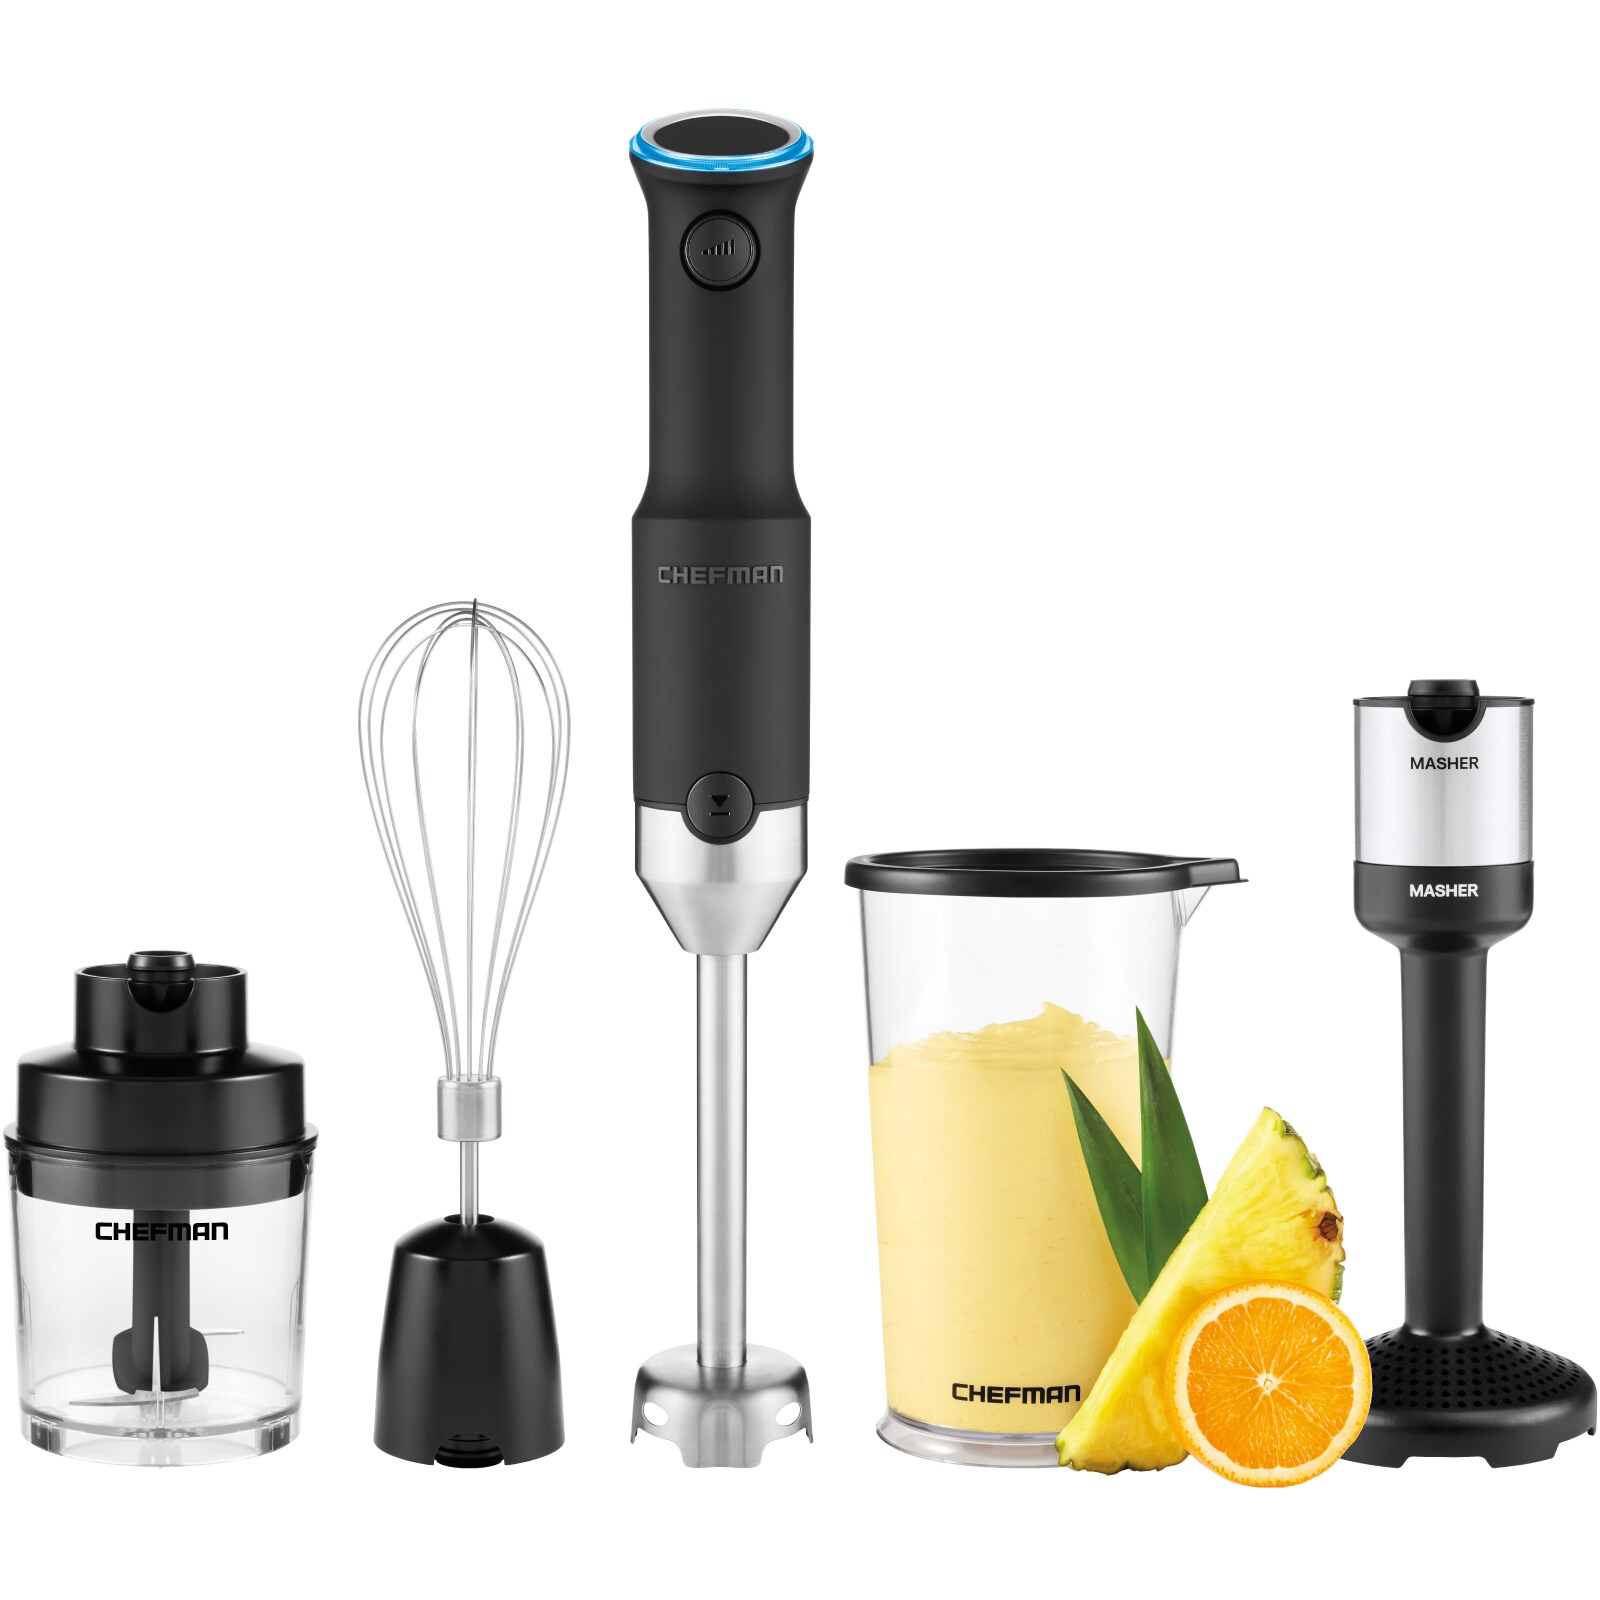 The manual blender takes an old concept and integrates it into a modern  unit as this is a blender that relies on human power, rat…